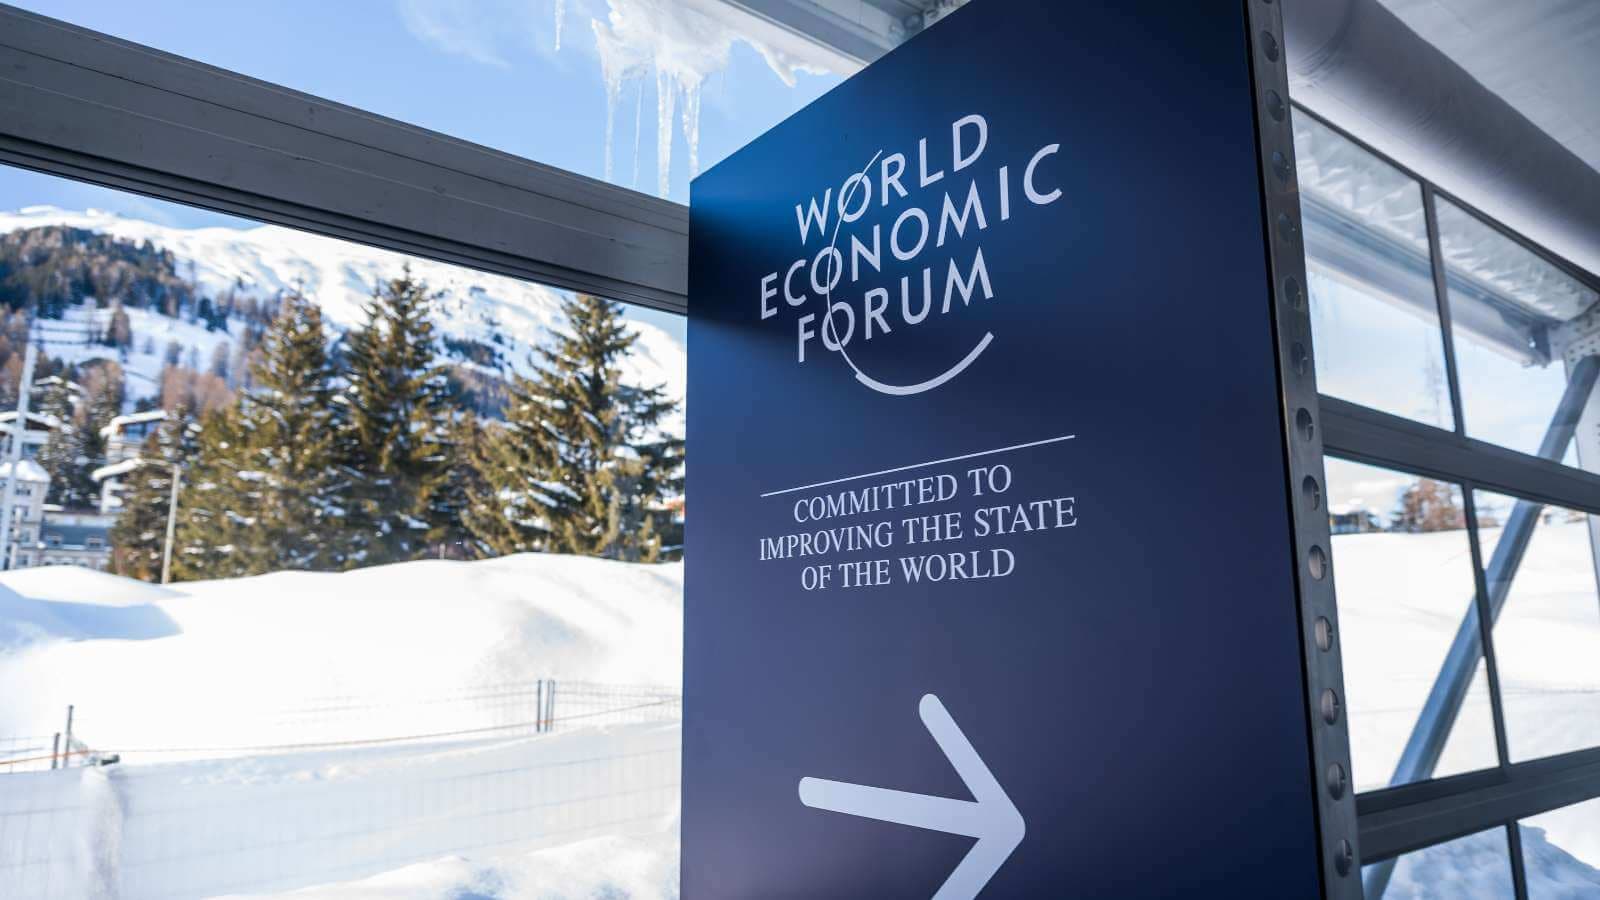 EPC Companies Can Catalyze India’s WEF Davos 2022 Goals. Here’s How